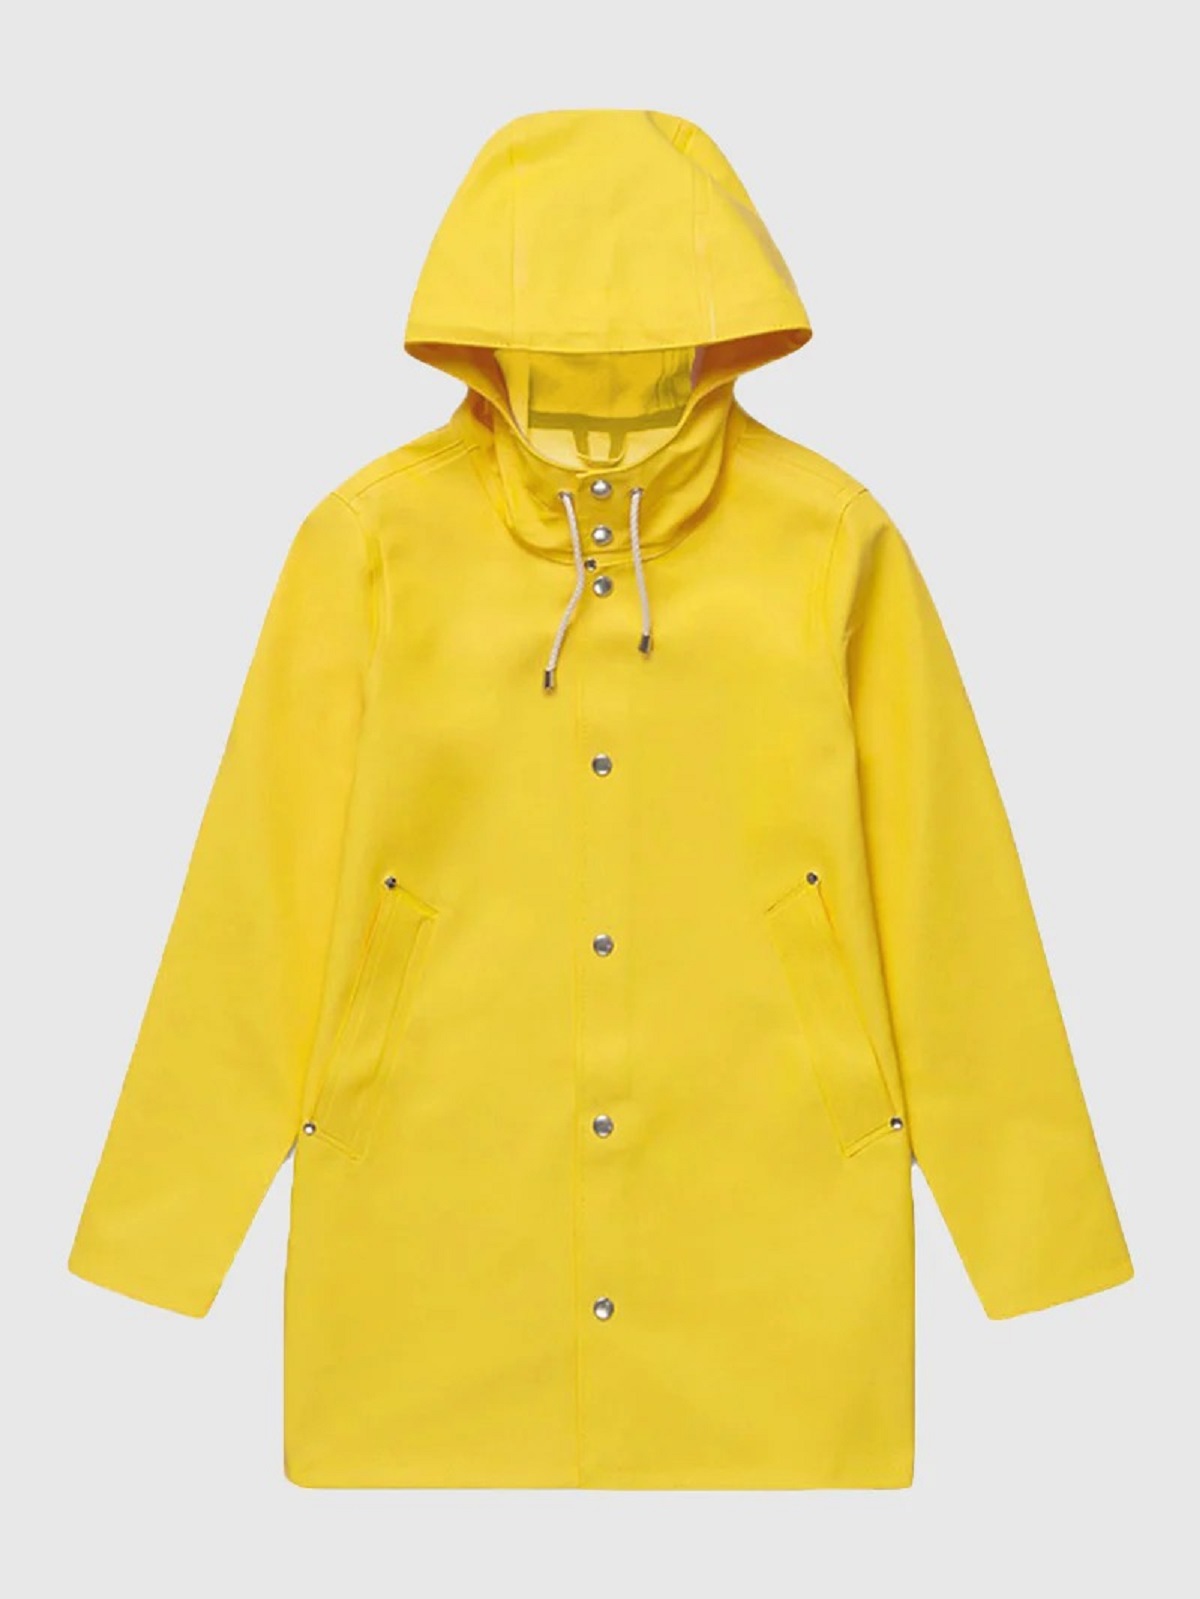 That raincoats typically have bright colours so you're easier to spot during heavy rain, not because raincoat designers have bad taste